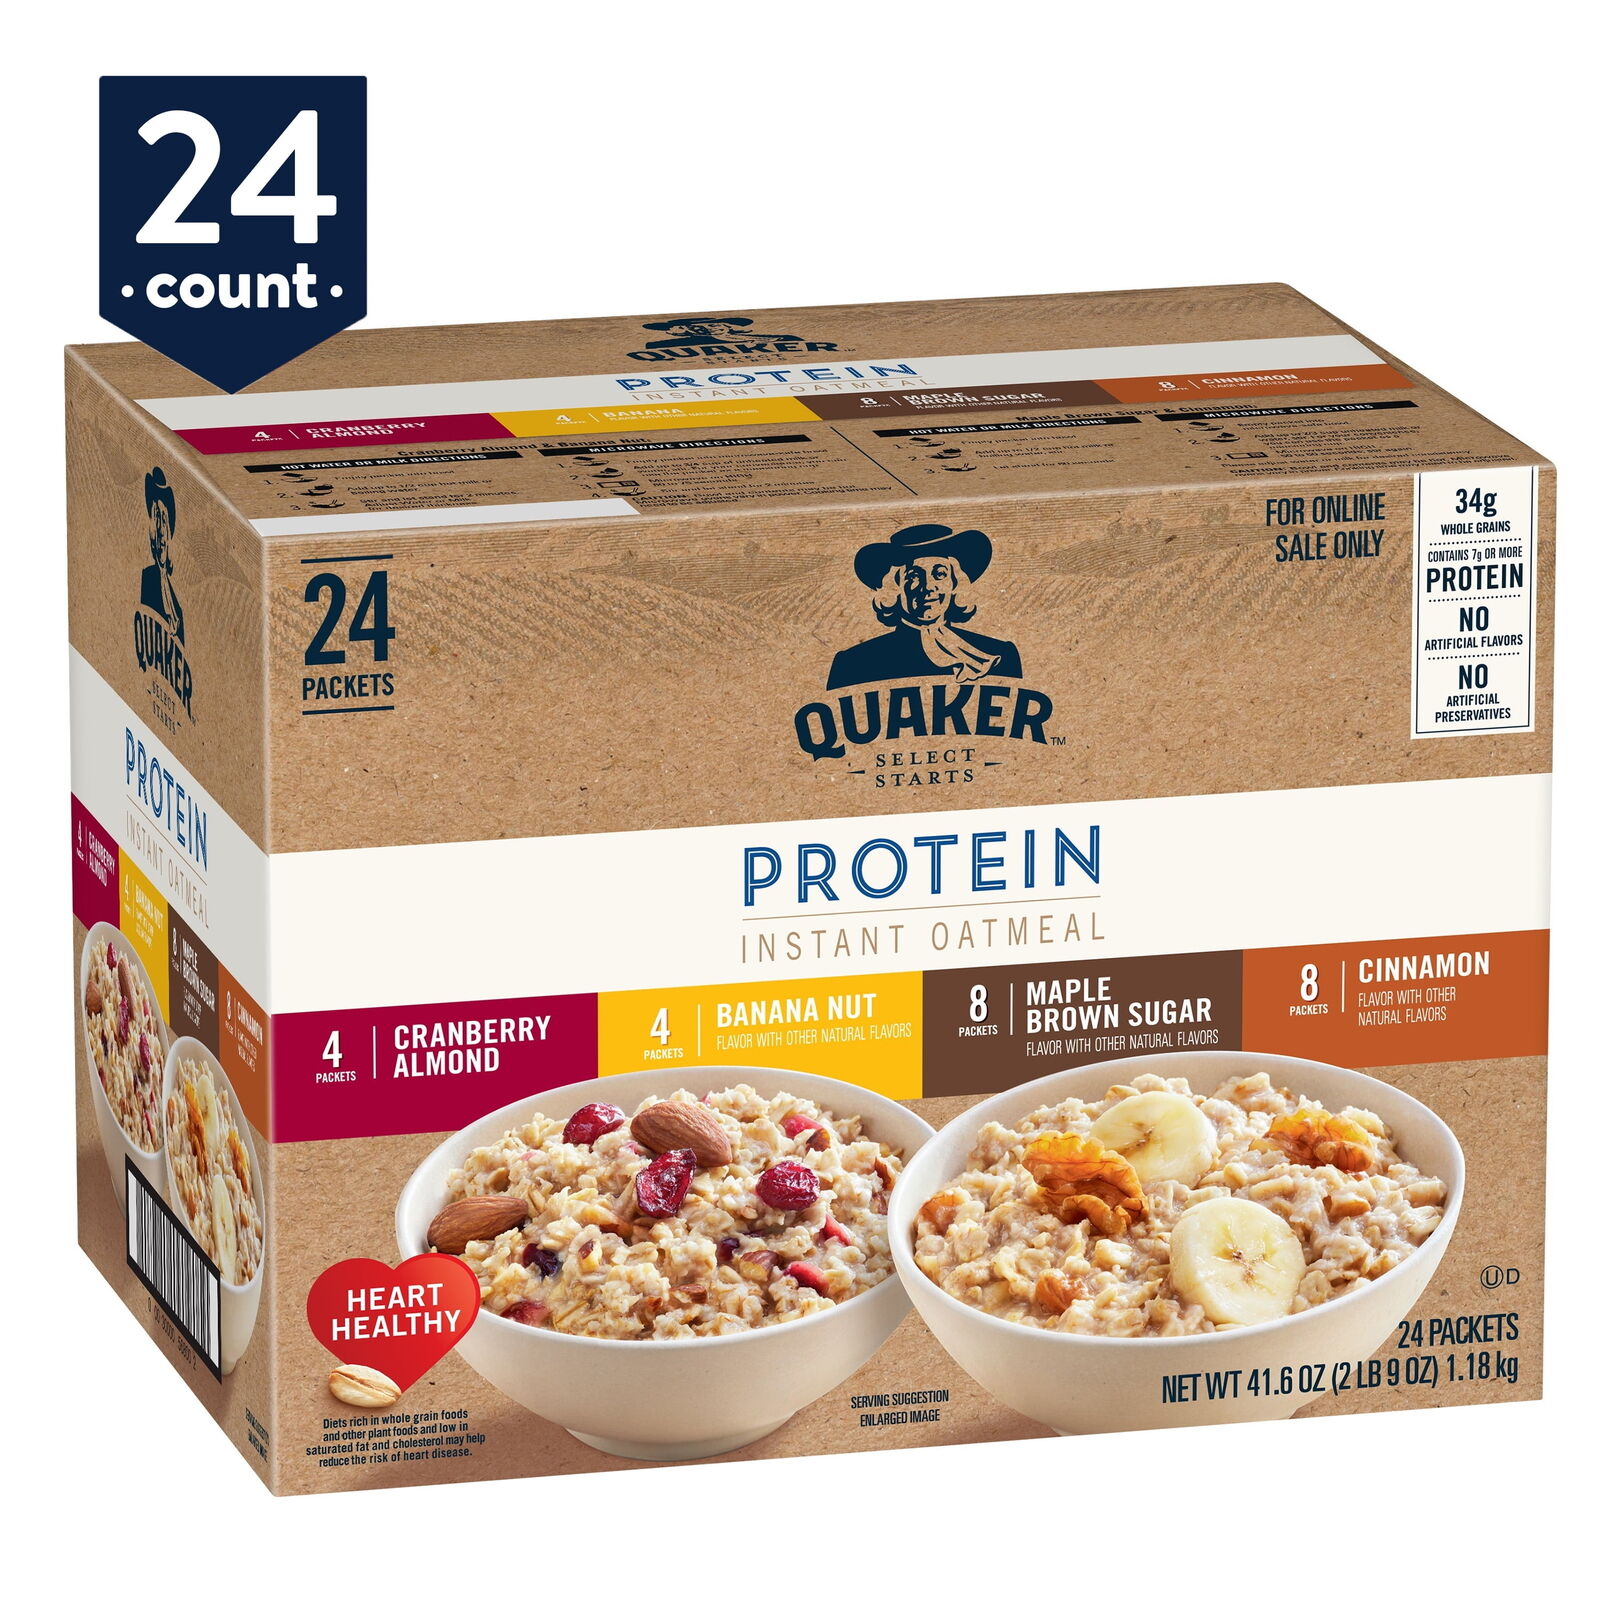 Quaker Instant Oatmeal, Protein Variety Pack, 24 Packets